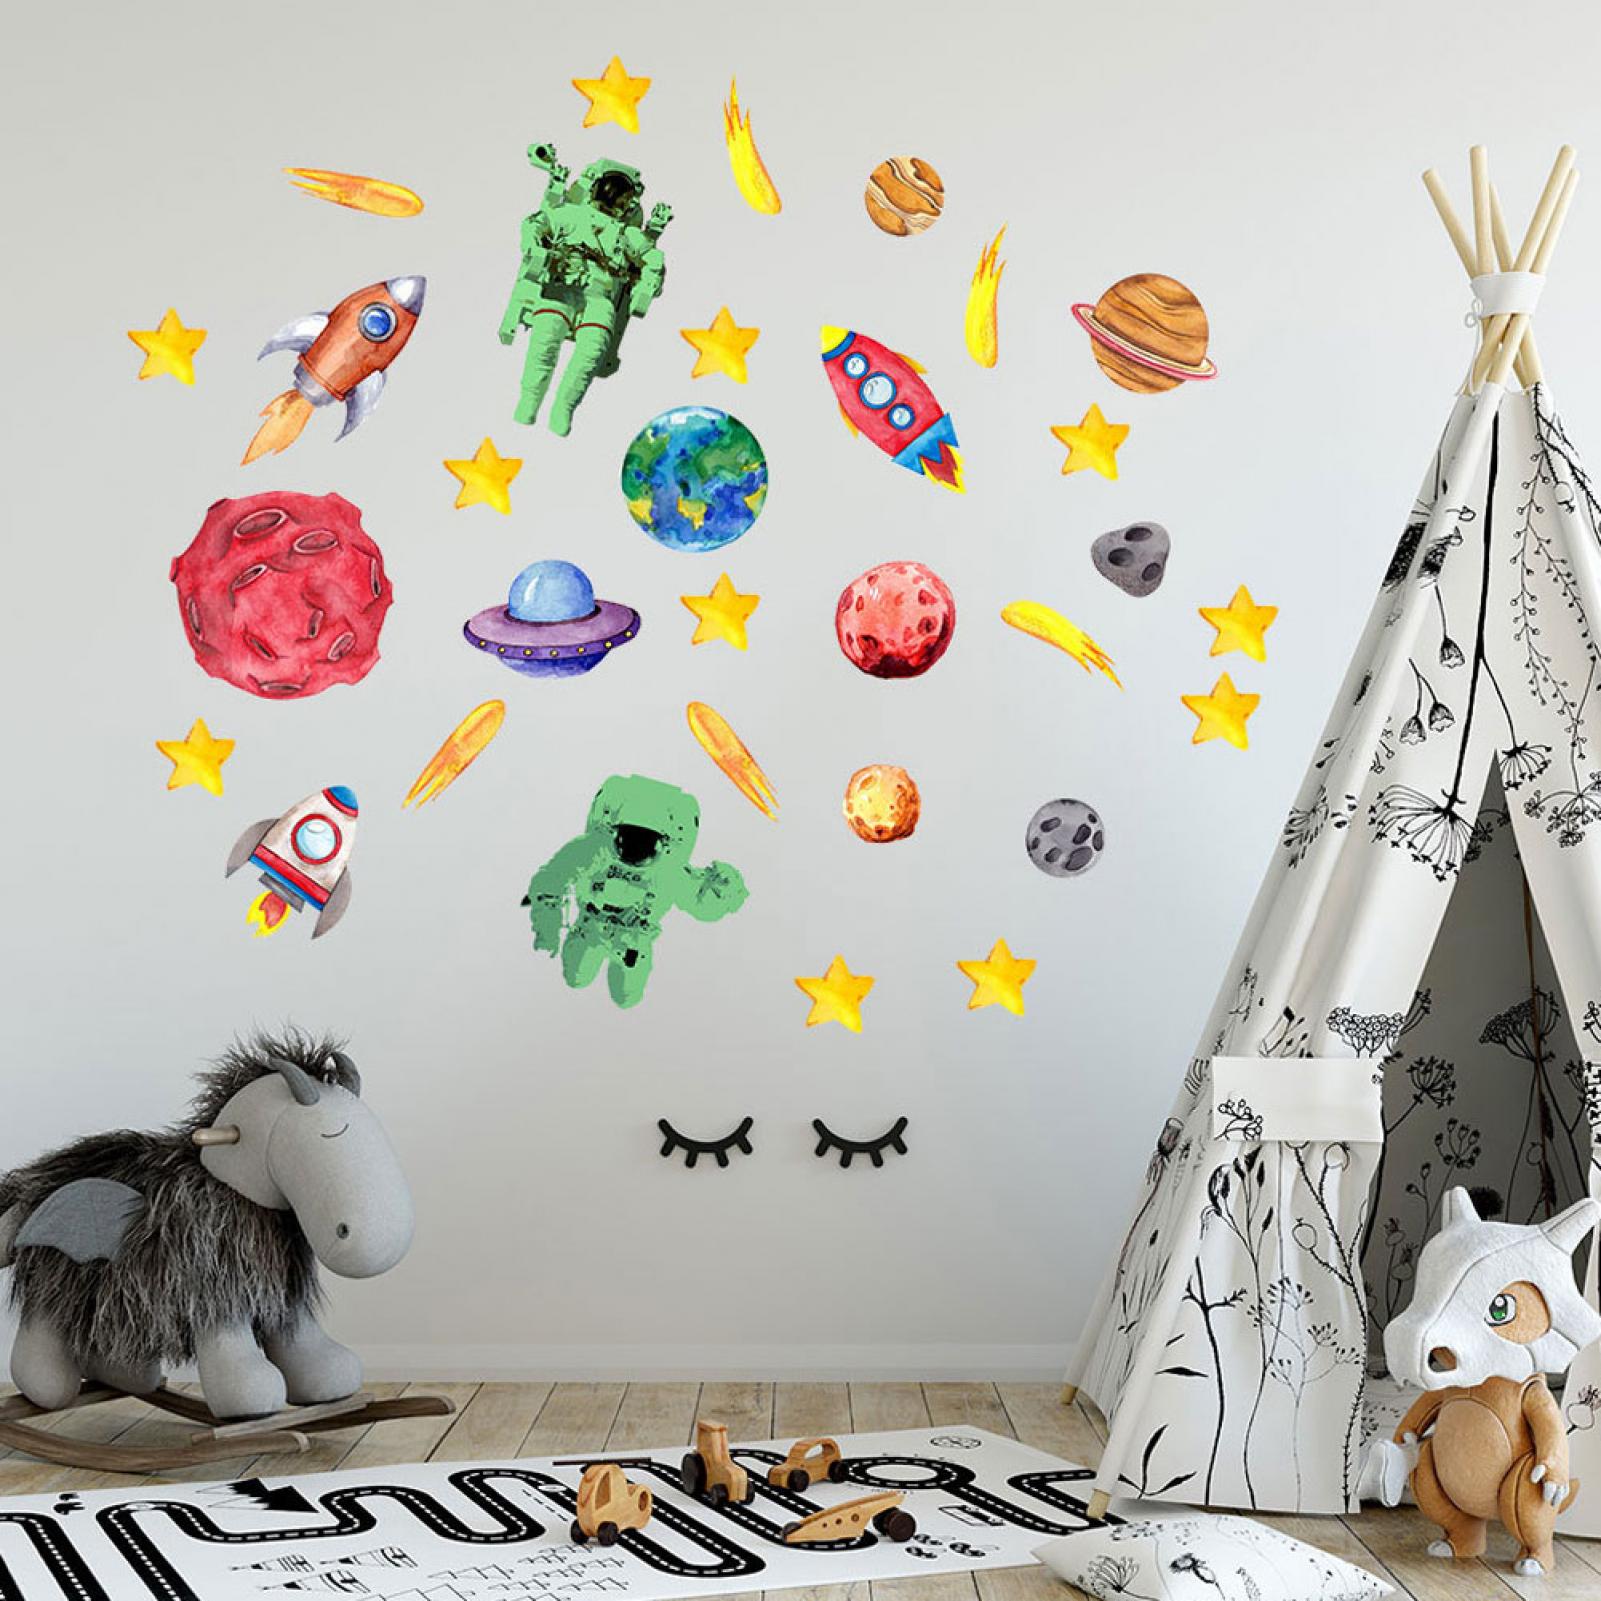 LHCER Wall Decor,Home Decoration,31Pcs DIY Space Spaceship Themed Glowing  Home Wall Sticker Luminous Children Room Decor